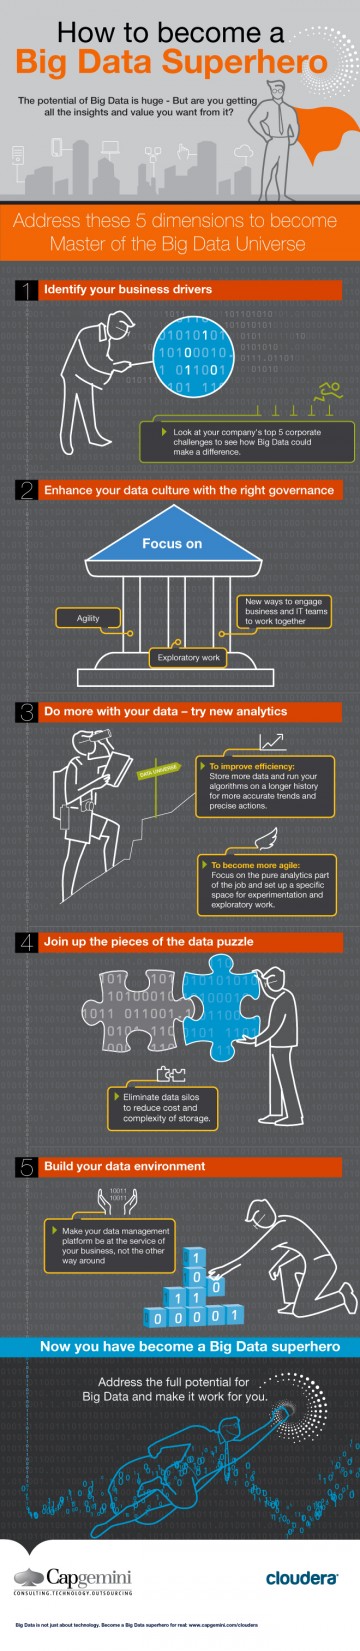 Infographic: How To Become A Big Data Super Hero